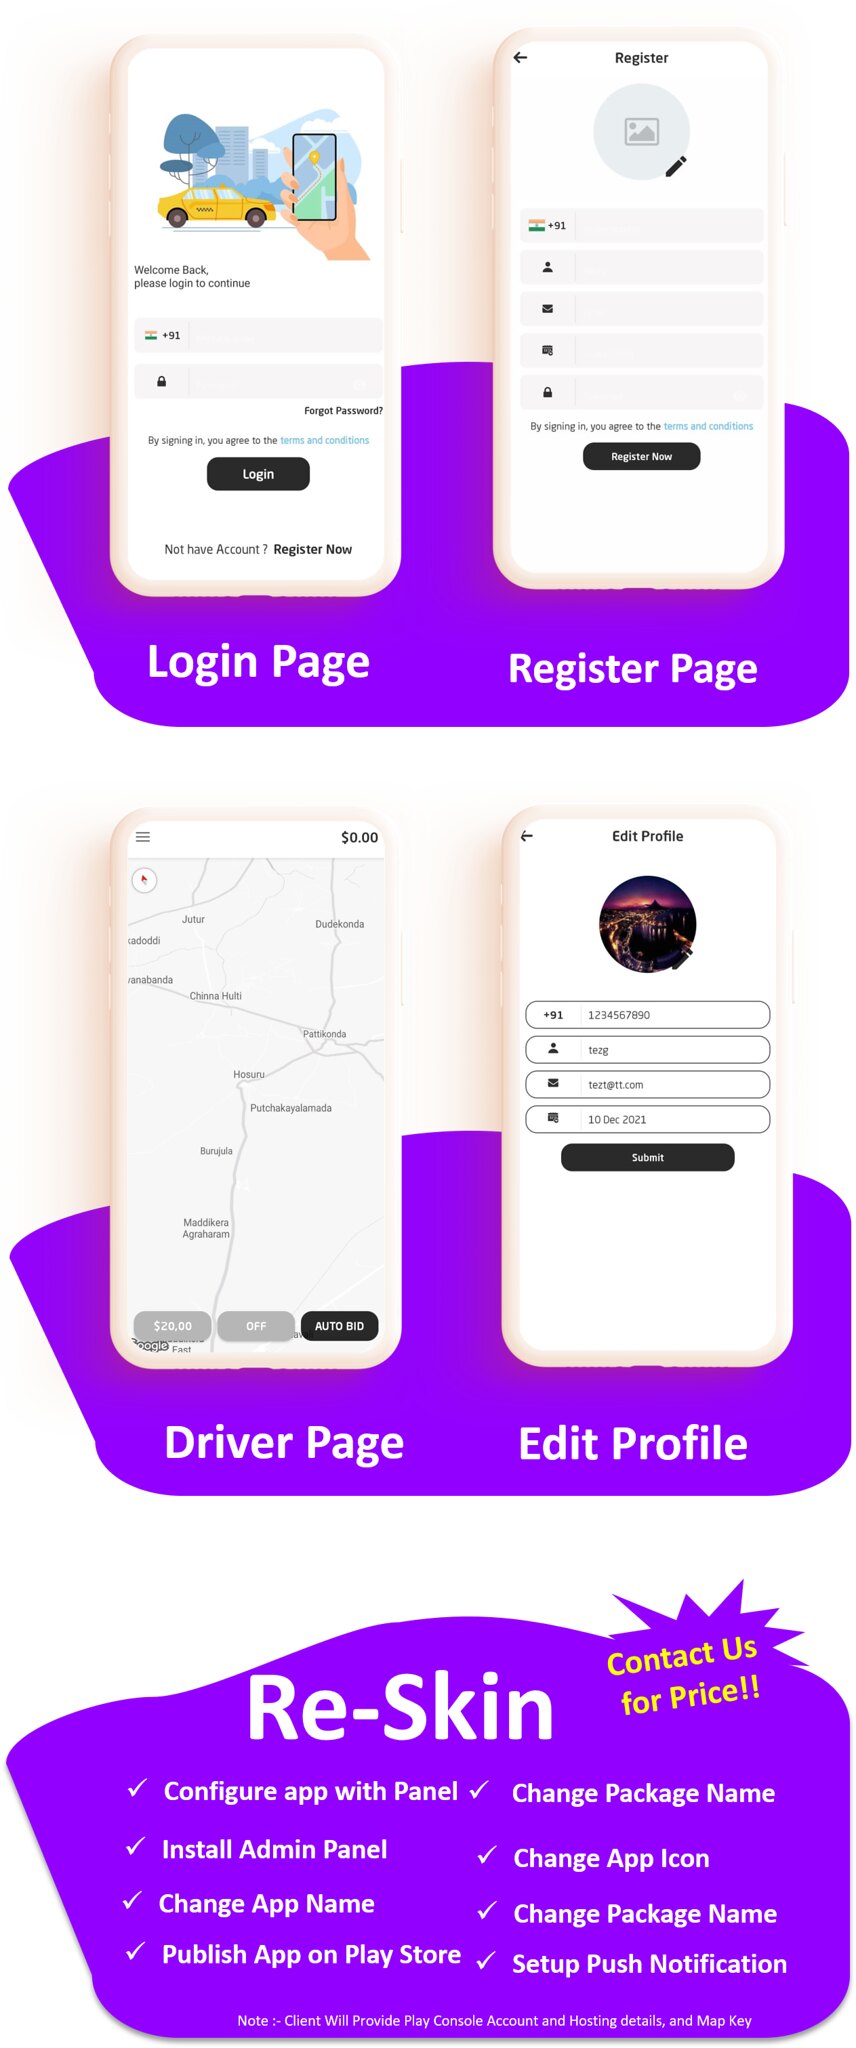 Duet Taxi App - Taxi App With Admin Panel | Multi Payment Gateway | Recharge Wallet | Notification - 5